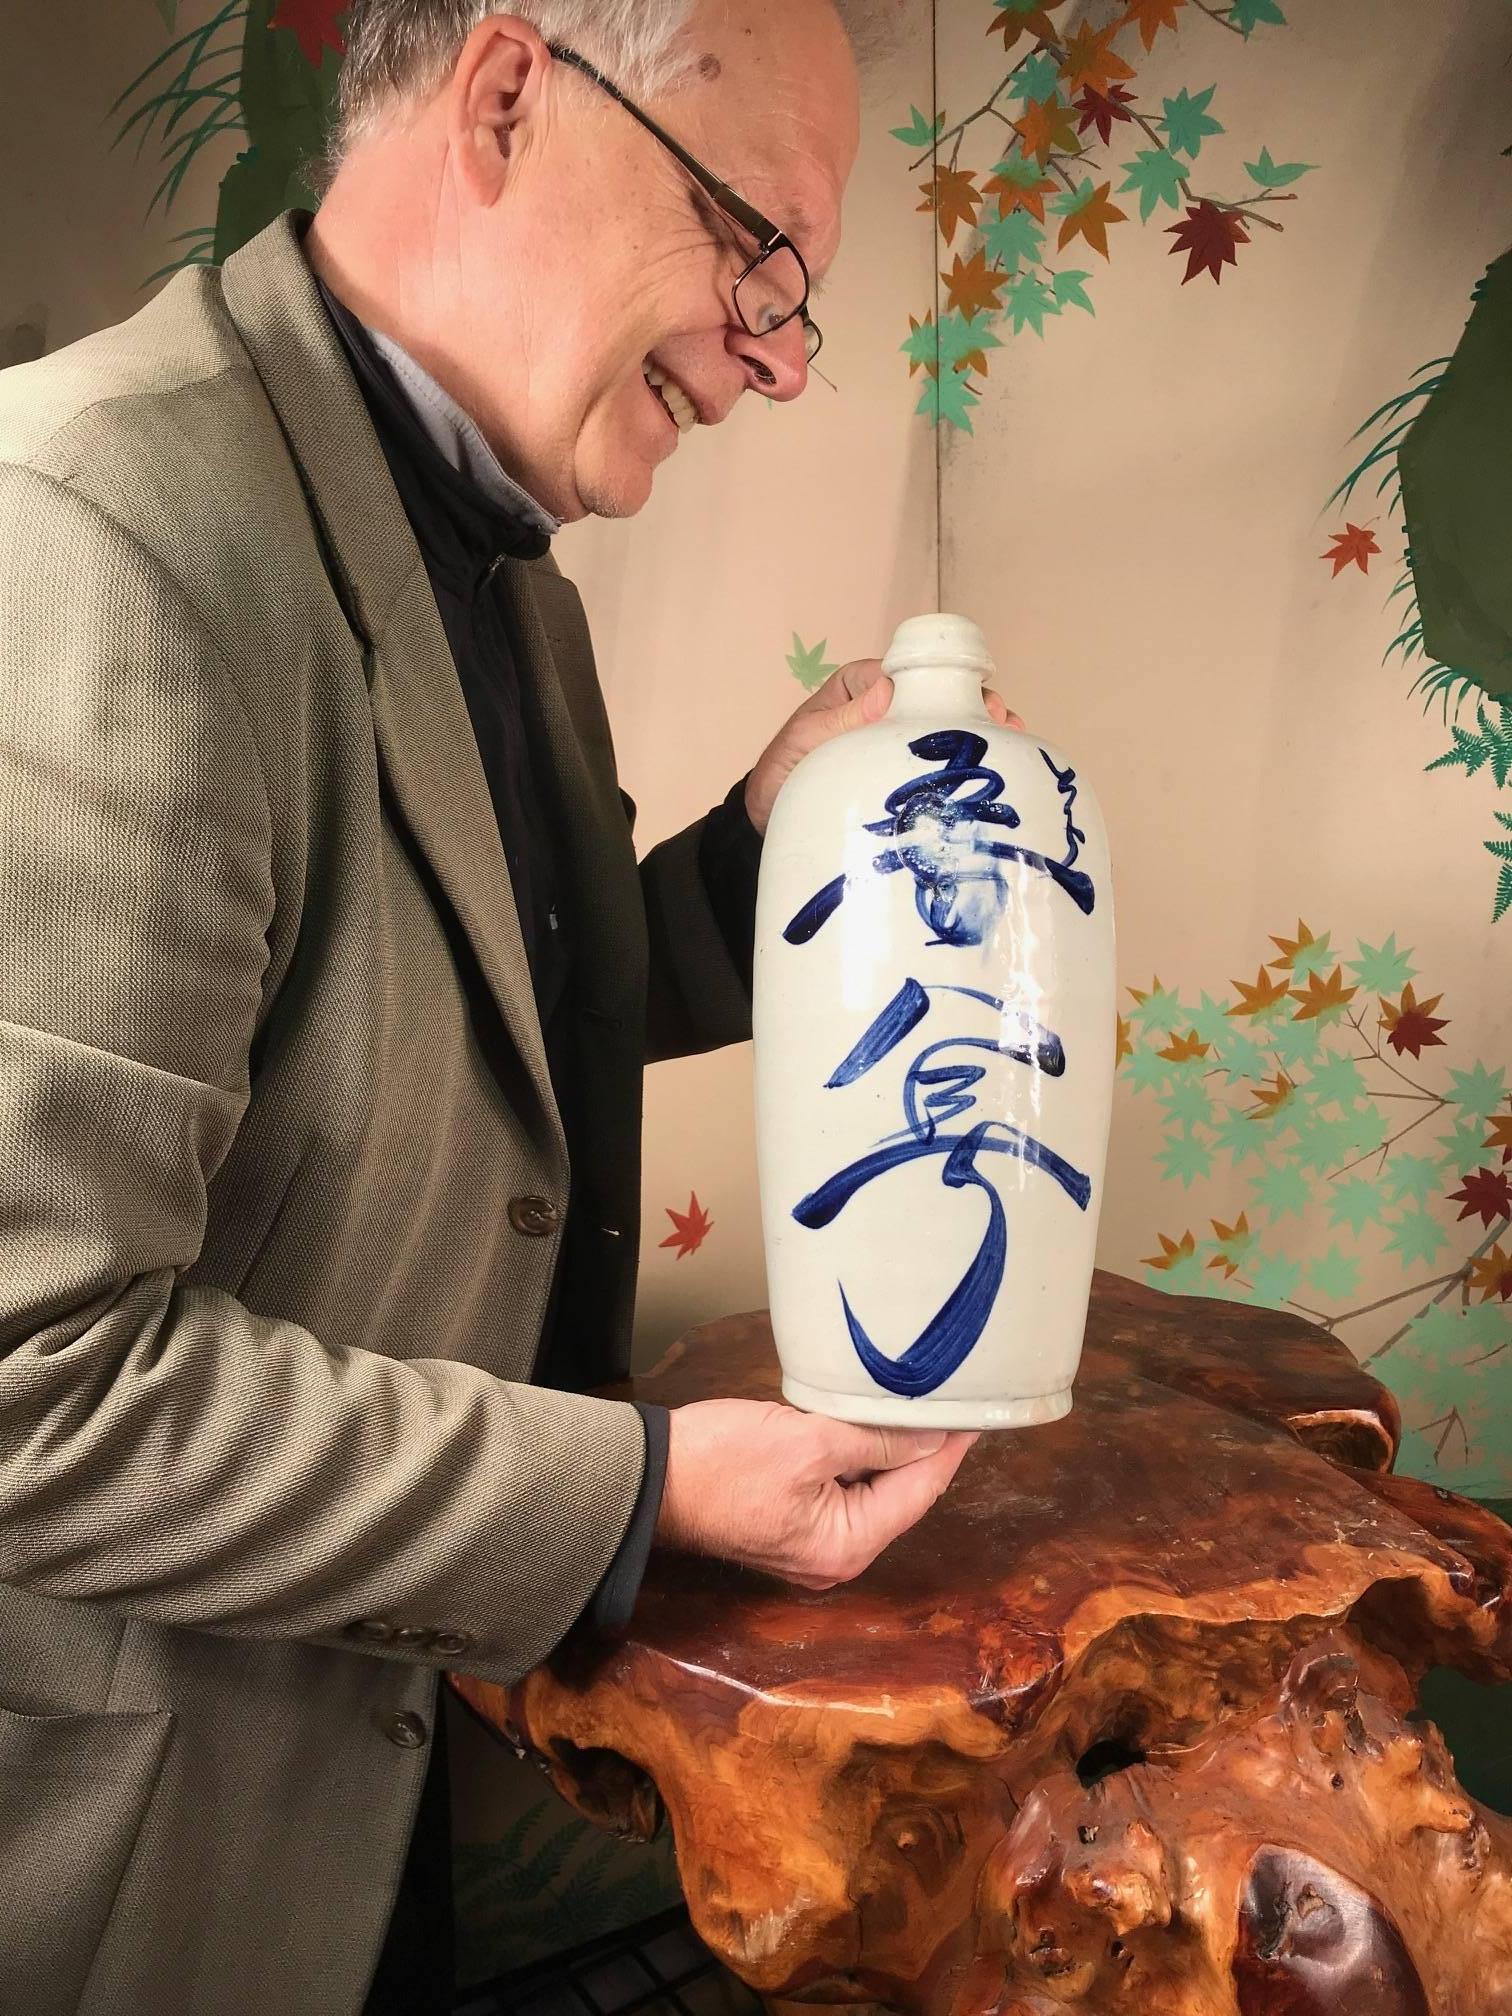 Here's a wonderful example of a fine antique Japanese hand-painted tall ceramic sake bottle. Notice the superb calligraphy detailed in cobalt blue glaze- trademarks of exquisite Japanese artistry. Calligraphy details the maker and brand.

This is a